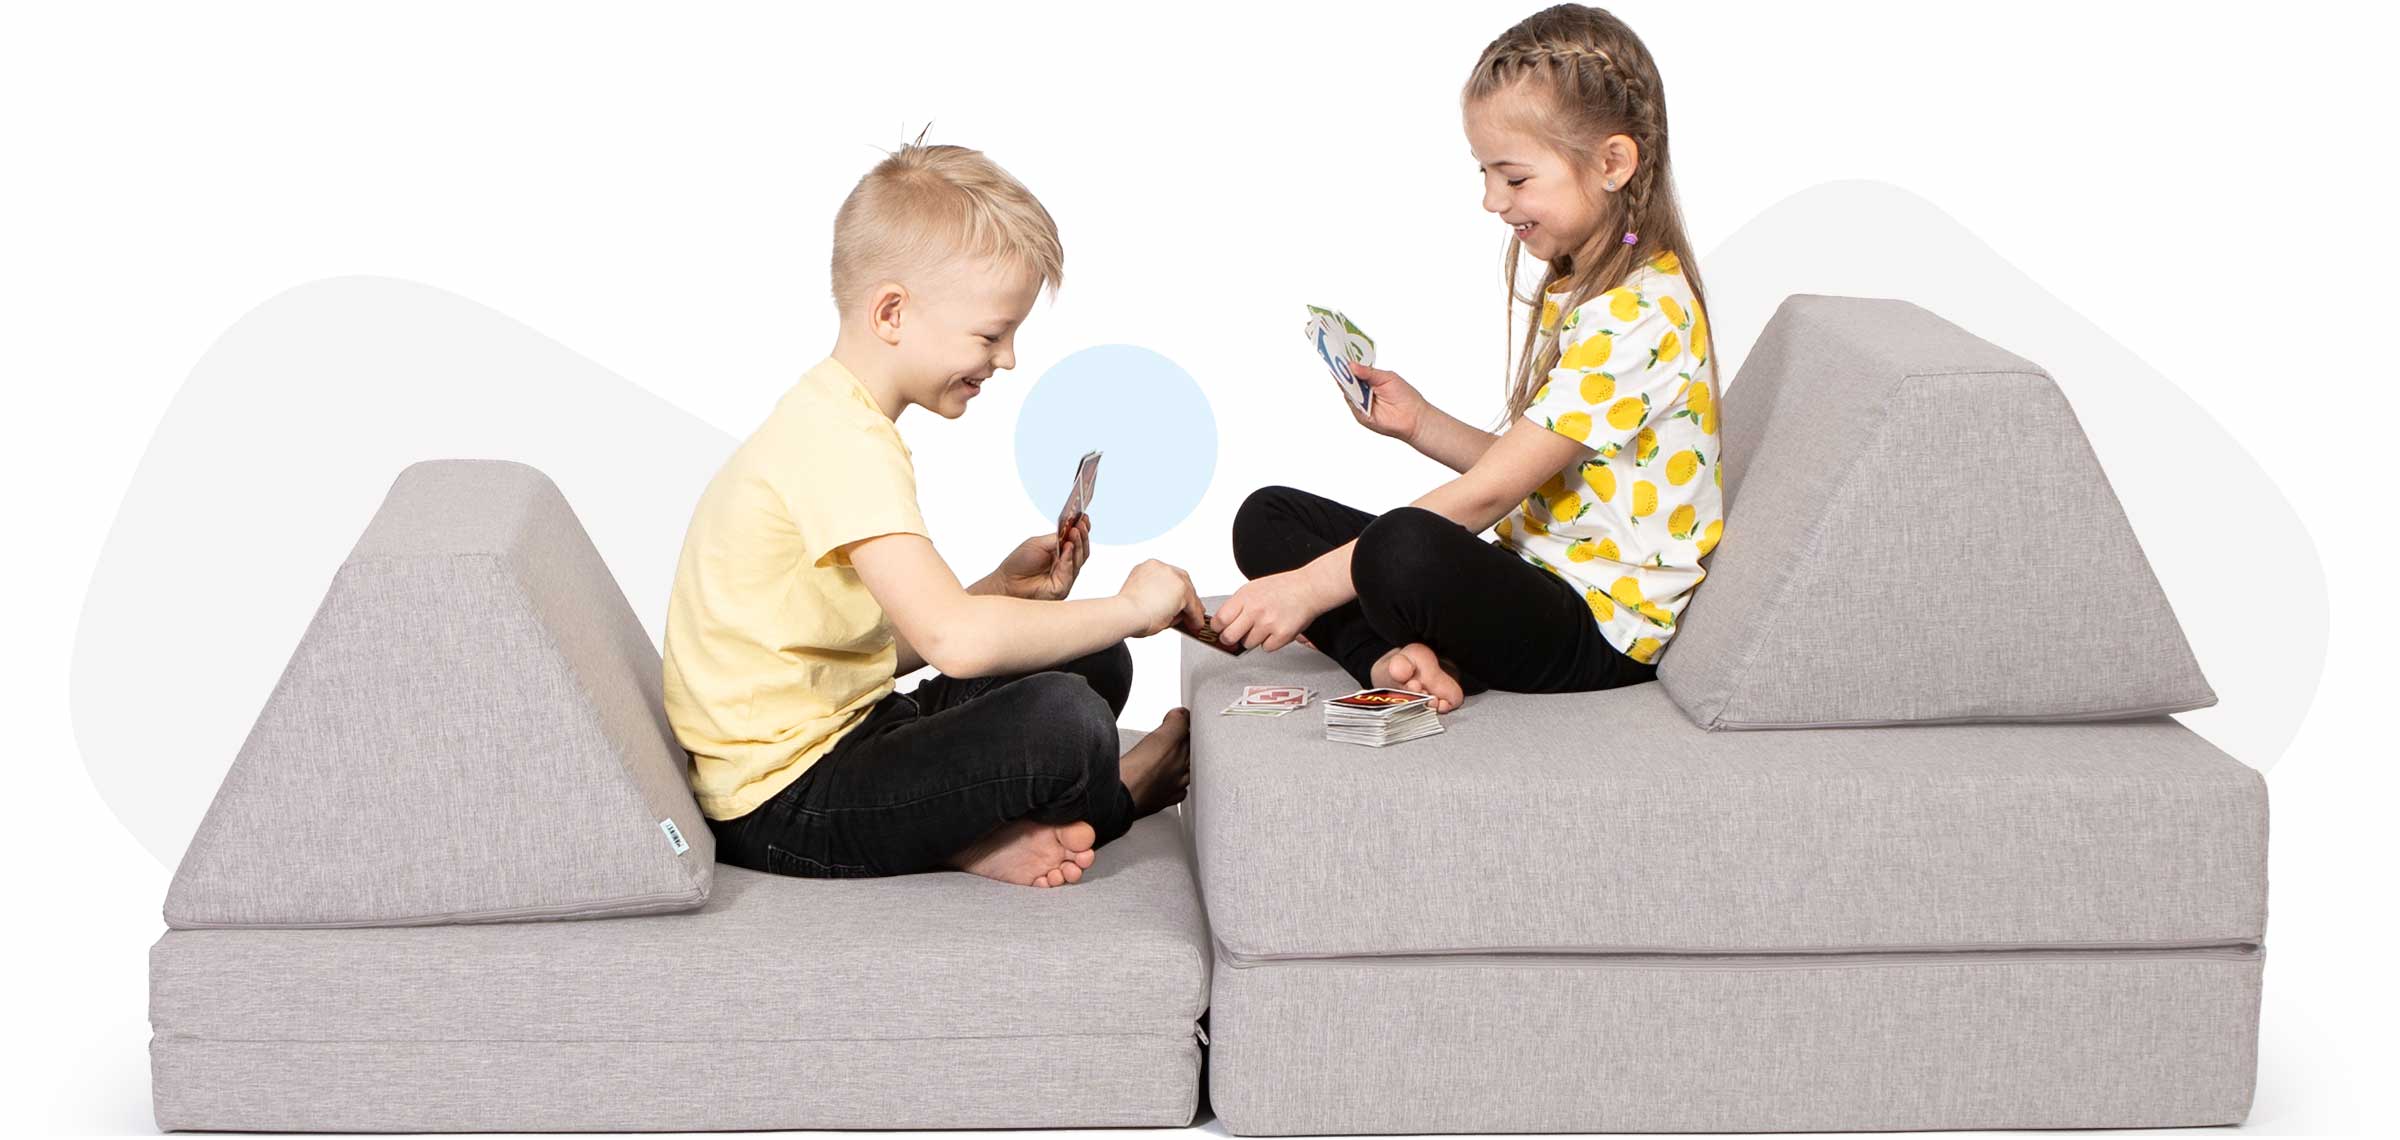 Kids sitting and playing cards on a beige Monboxy soft play sofa